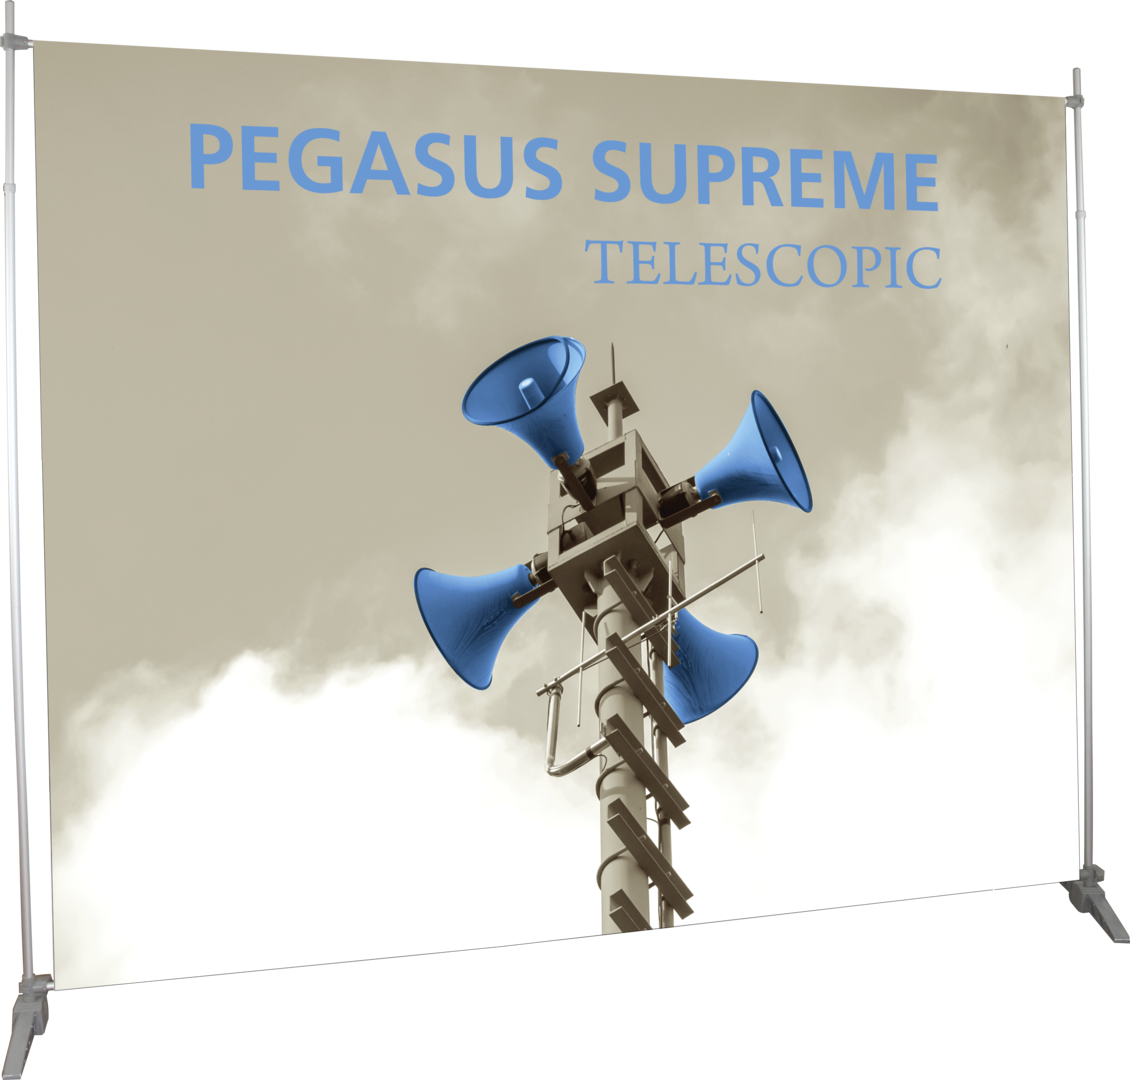 8ft x 10ft Pegasus Supreme Telescopic Banner Stand (Vinyl Graphic Only)